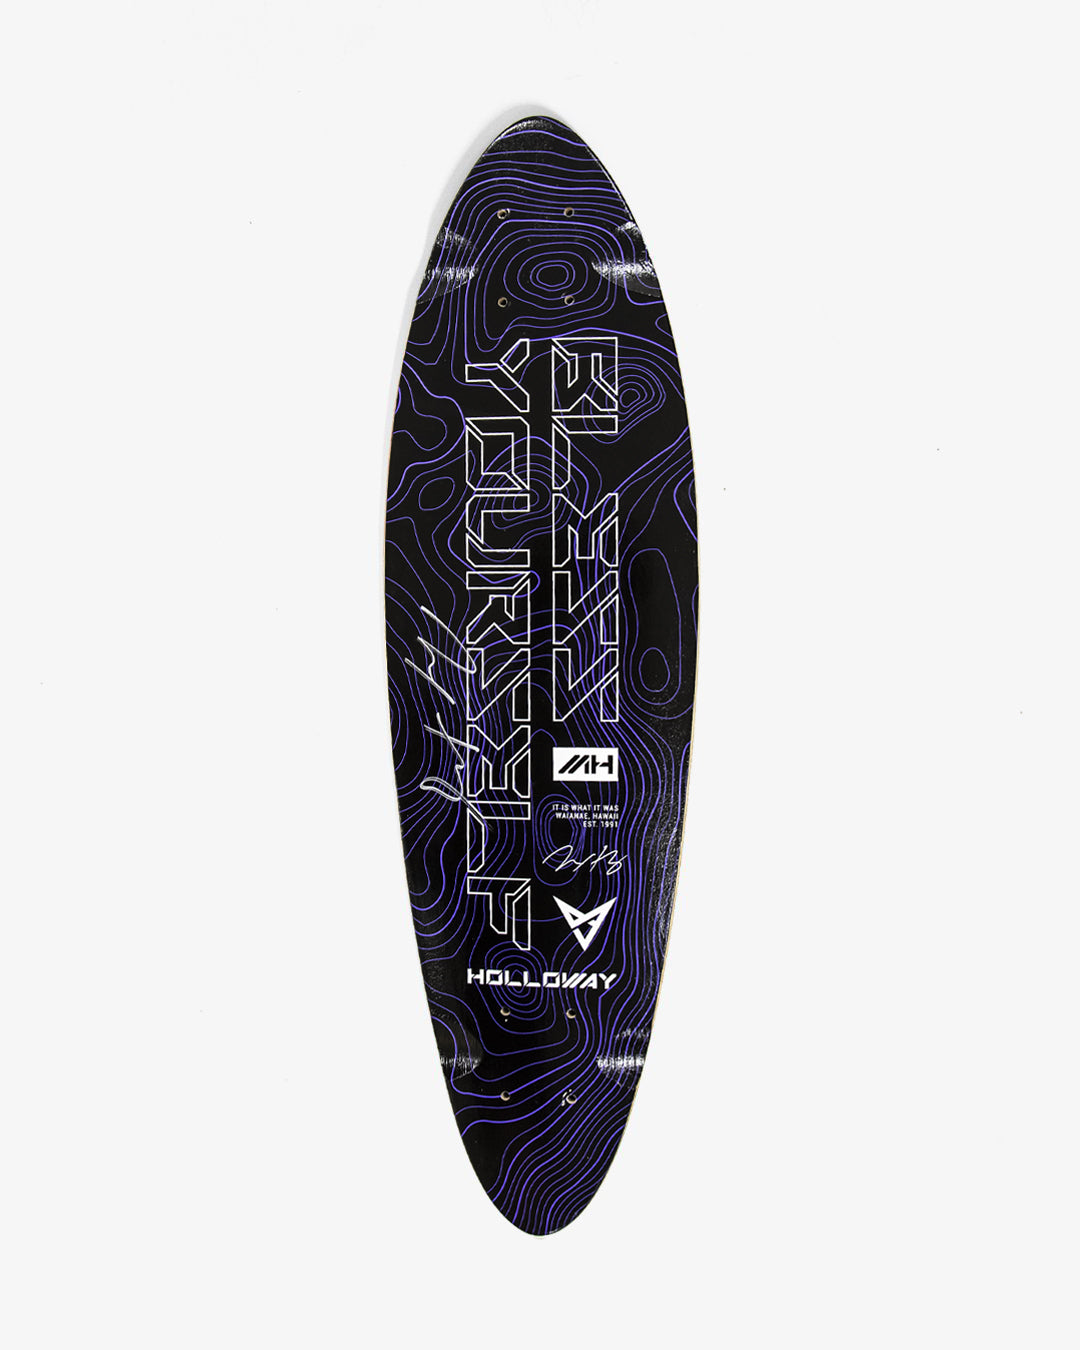 Limited Edition Autographed Bless Yourself Short Board